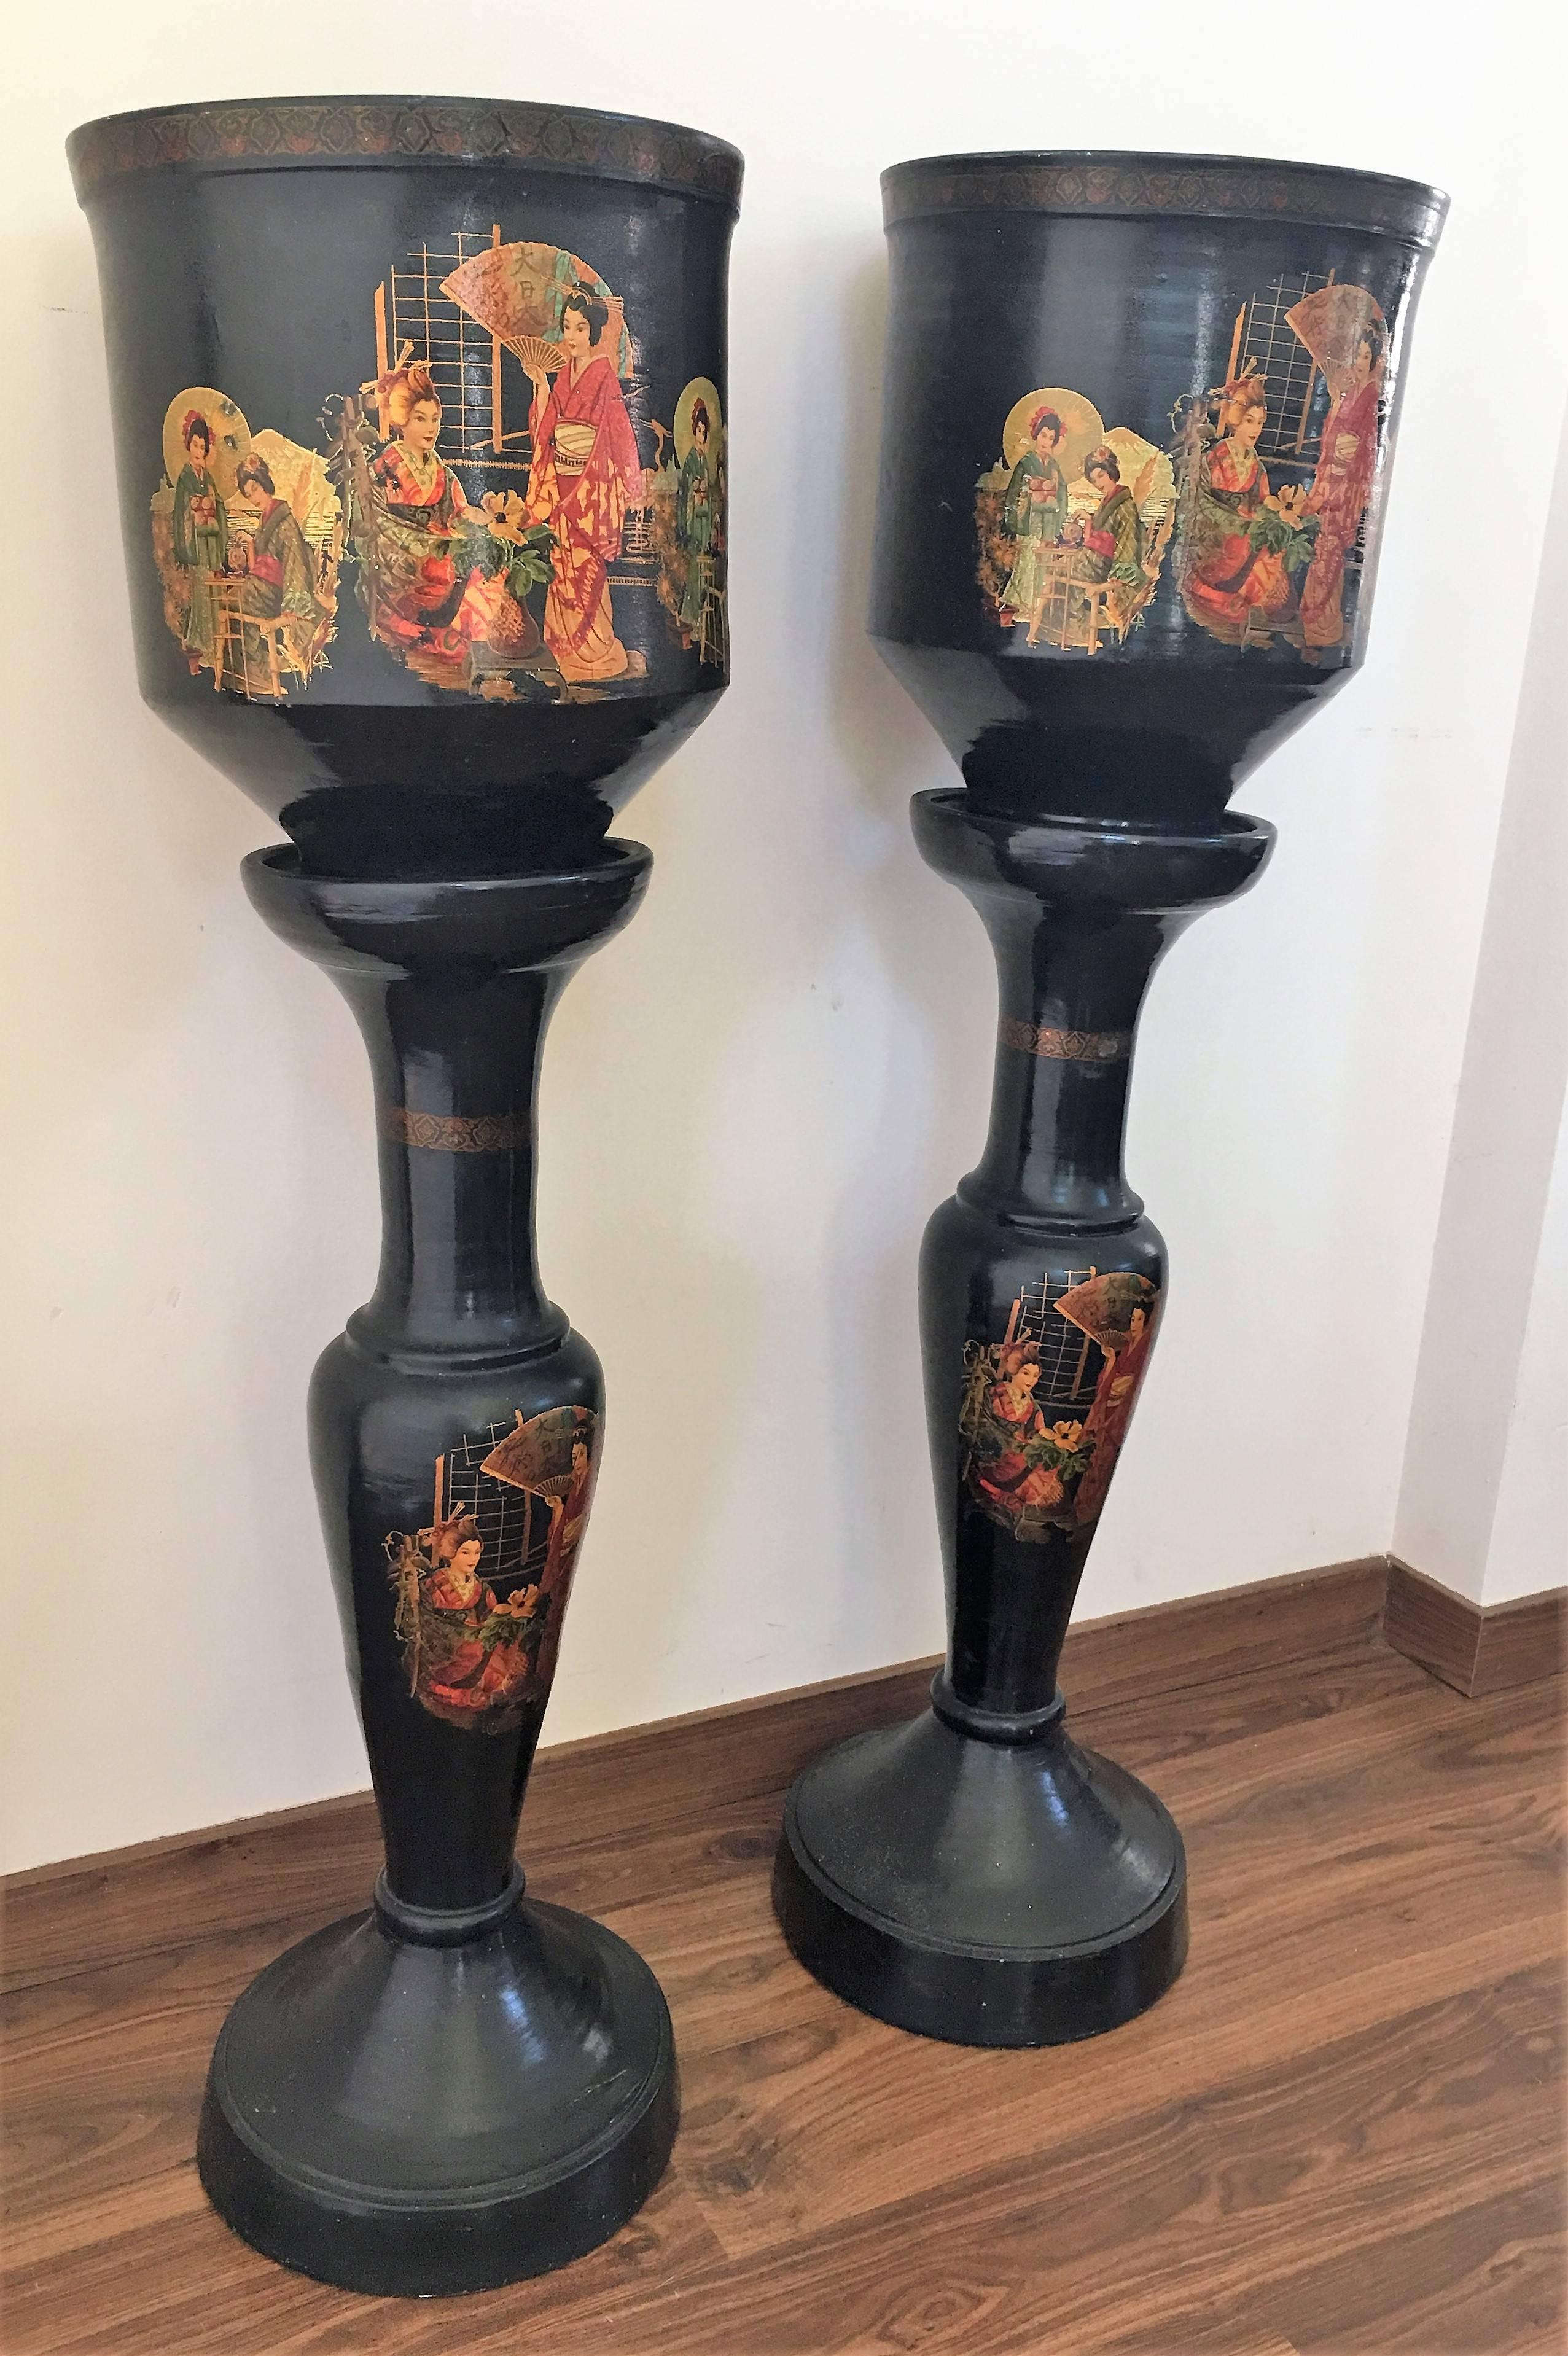 Asian Pair of Large Chinoiserie Style Urns or Vases on Pedestals of Glazed Terracotta